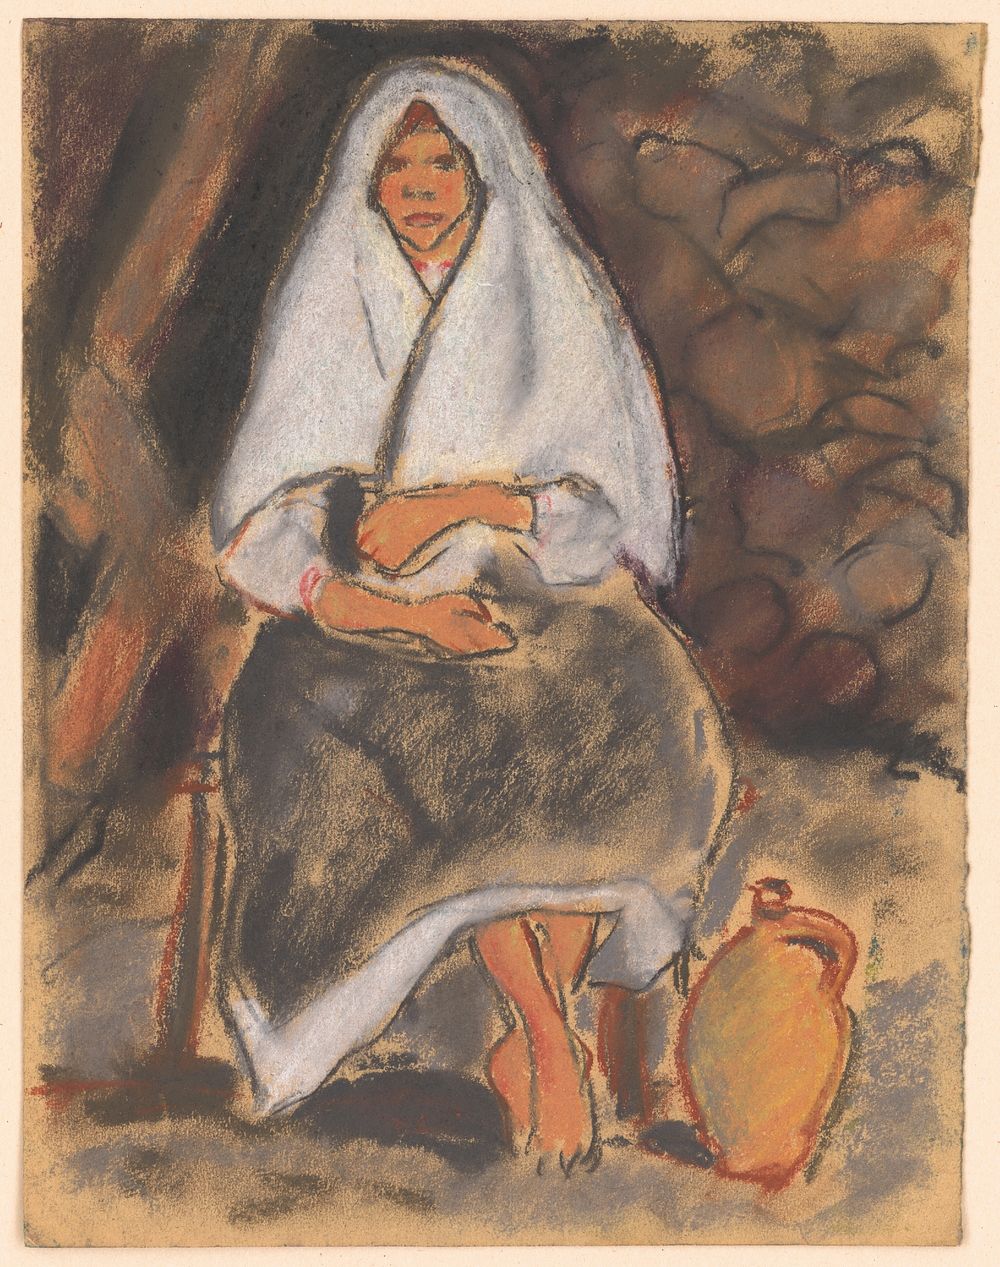 Seated girl with a jug by Zolo Palugyay